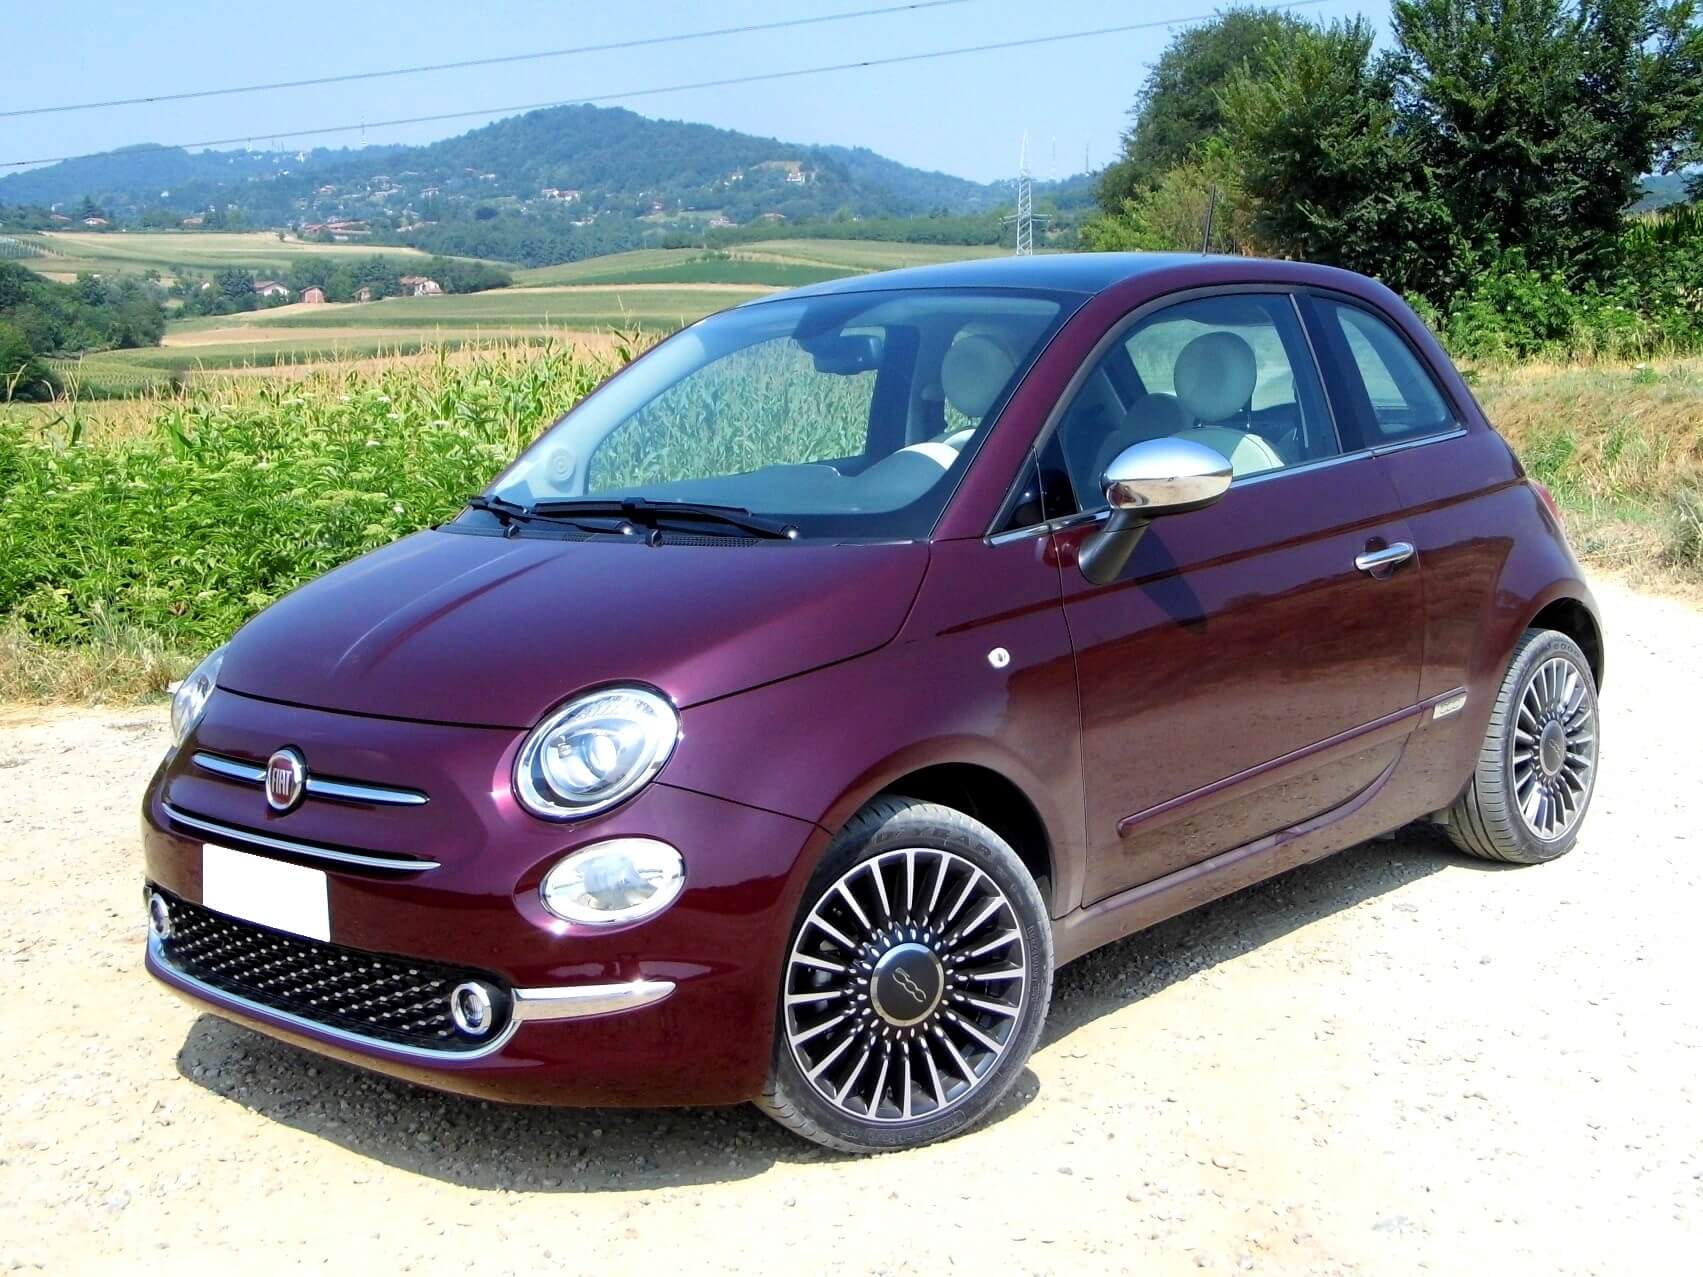 Fiat 500 Lounge: frontal.